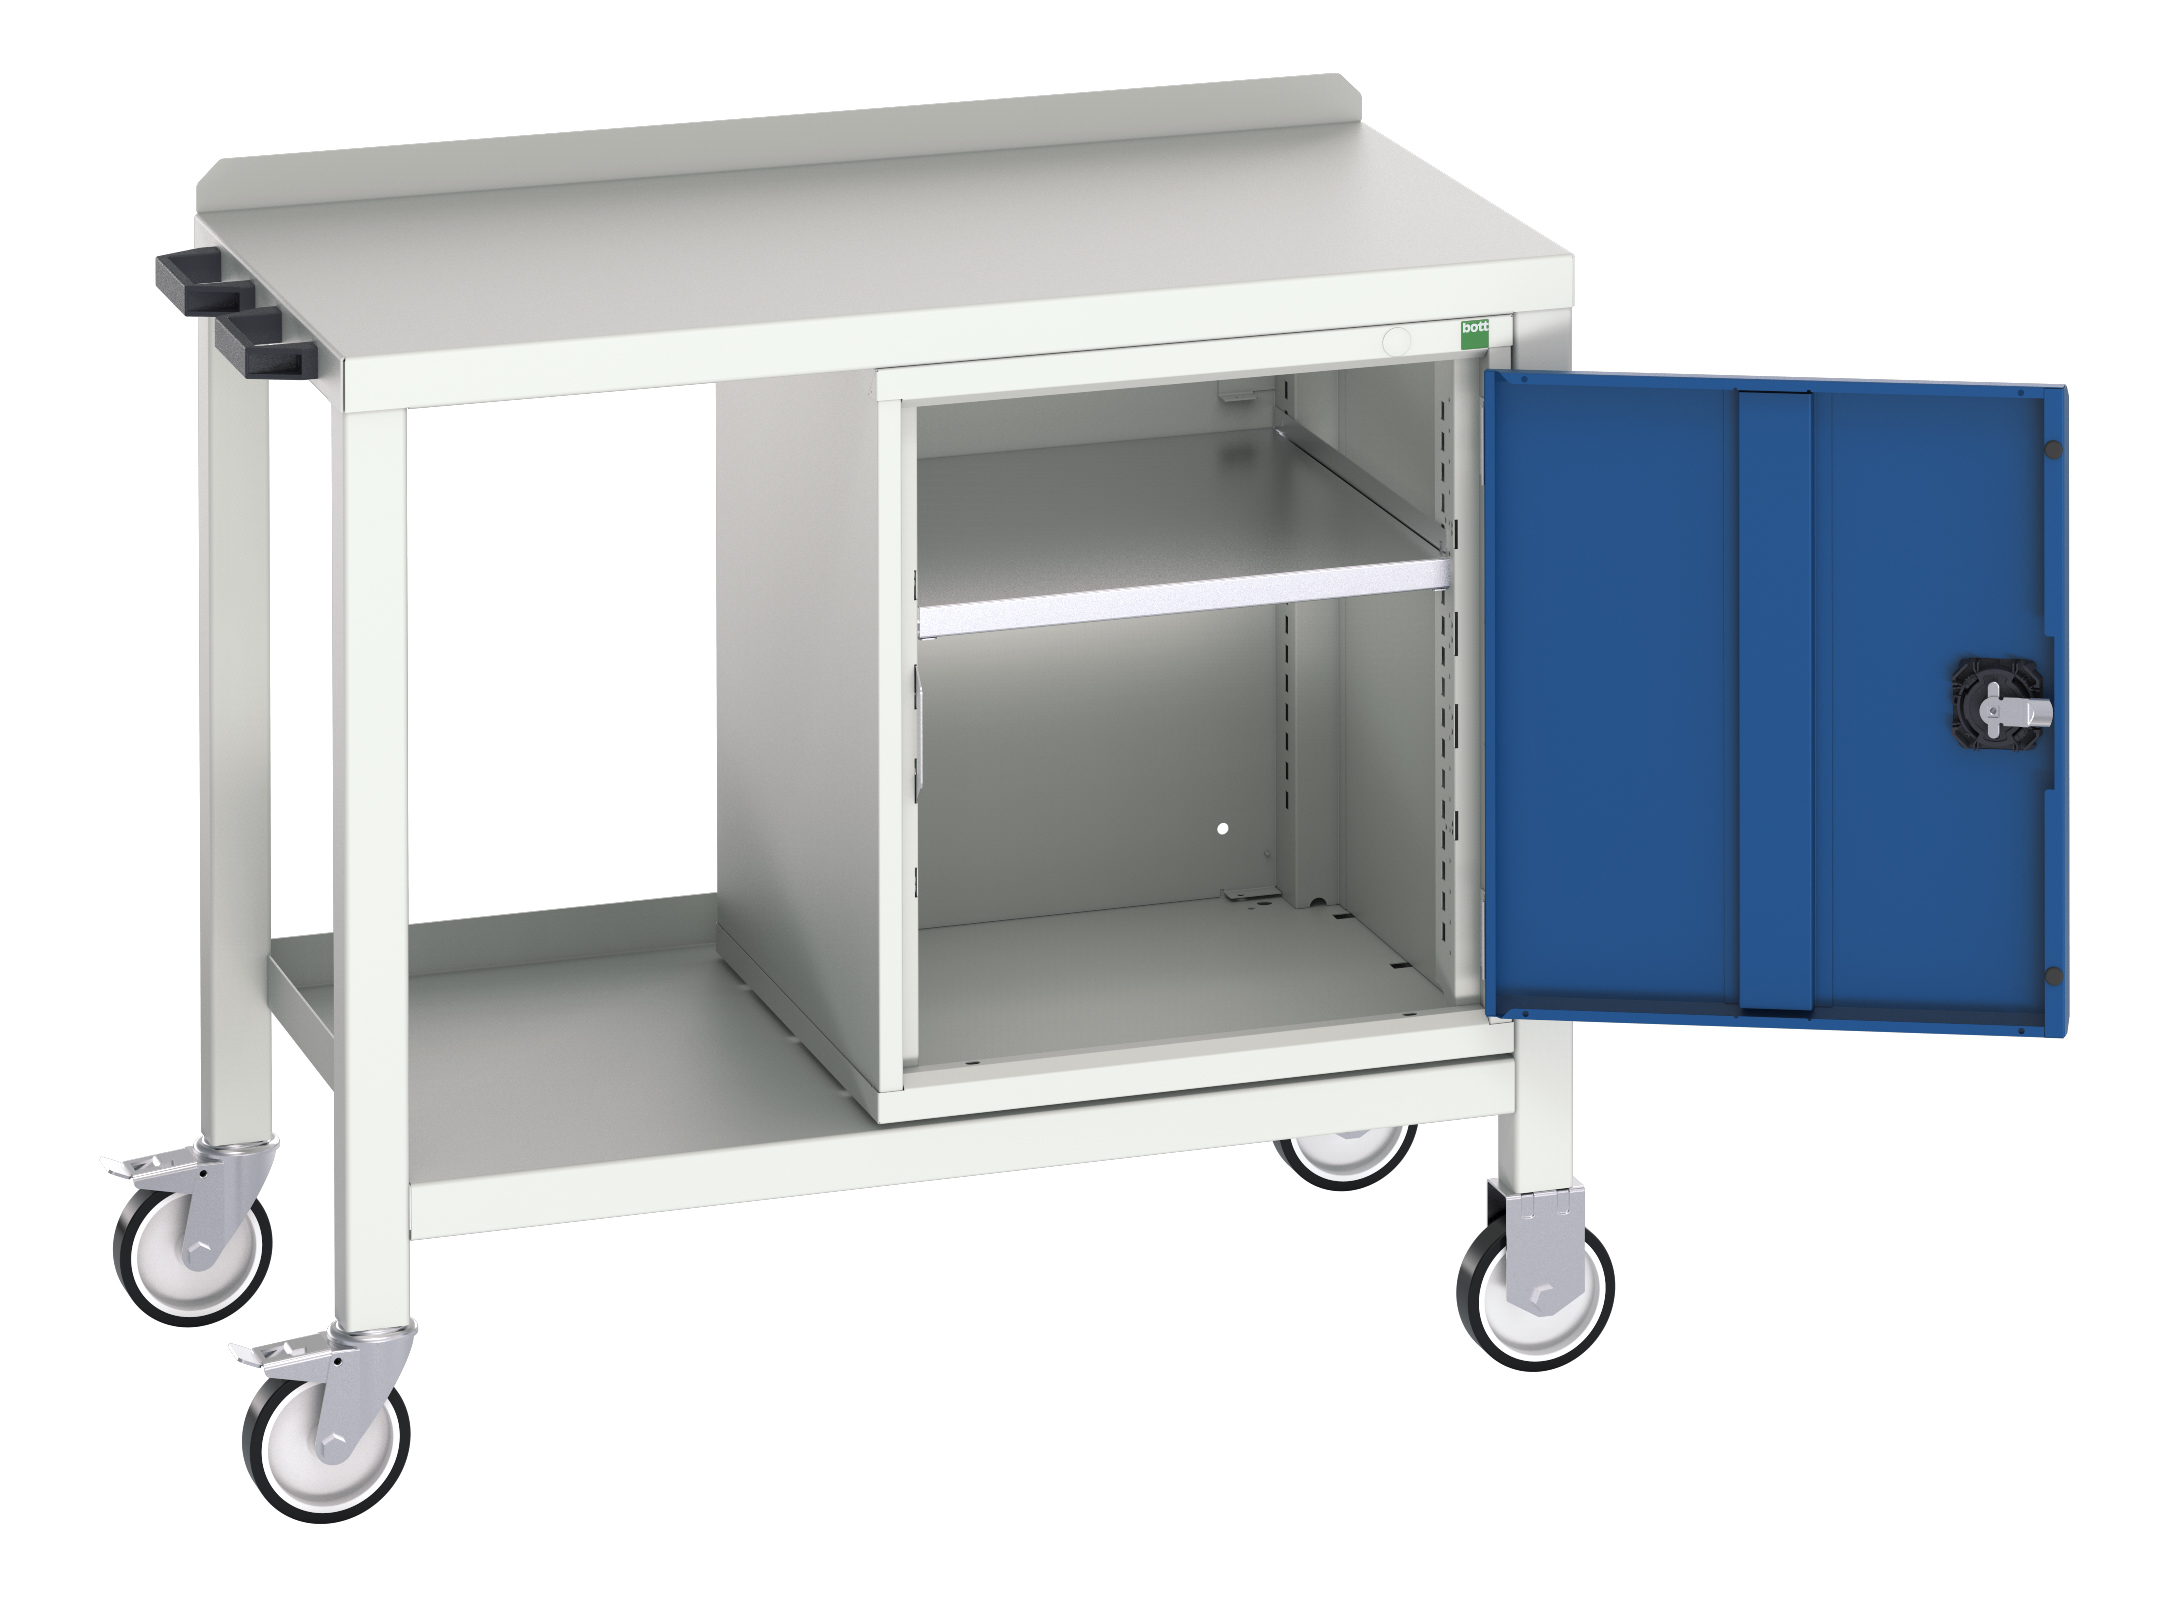 Bott Verso Mobile Welded Bench With Full Cupboard - 16922802.11